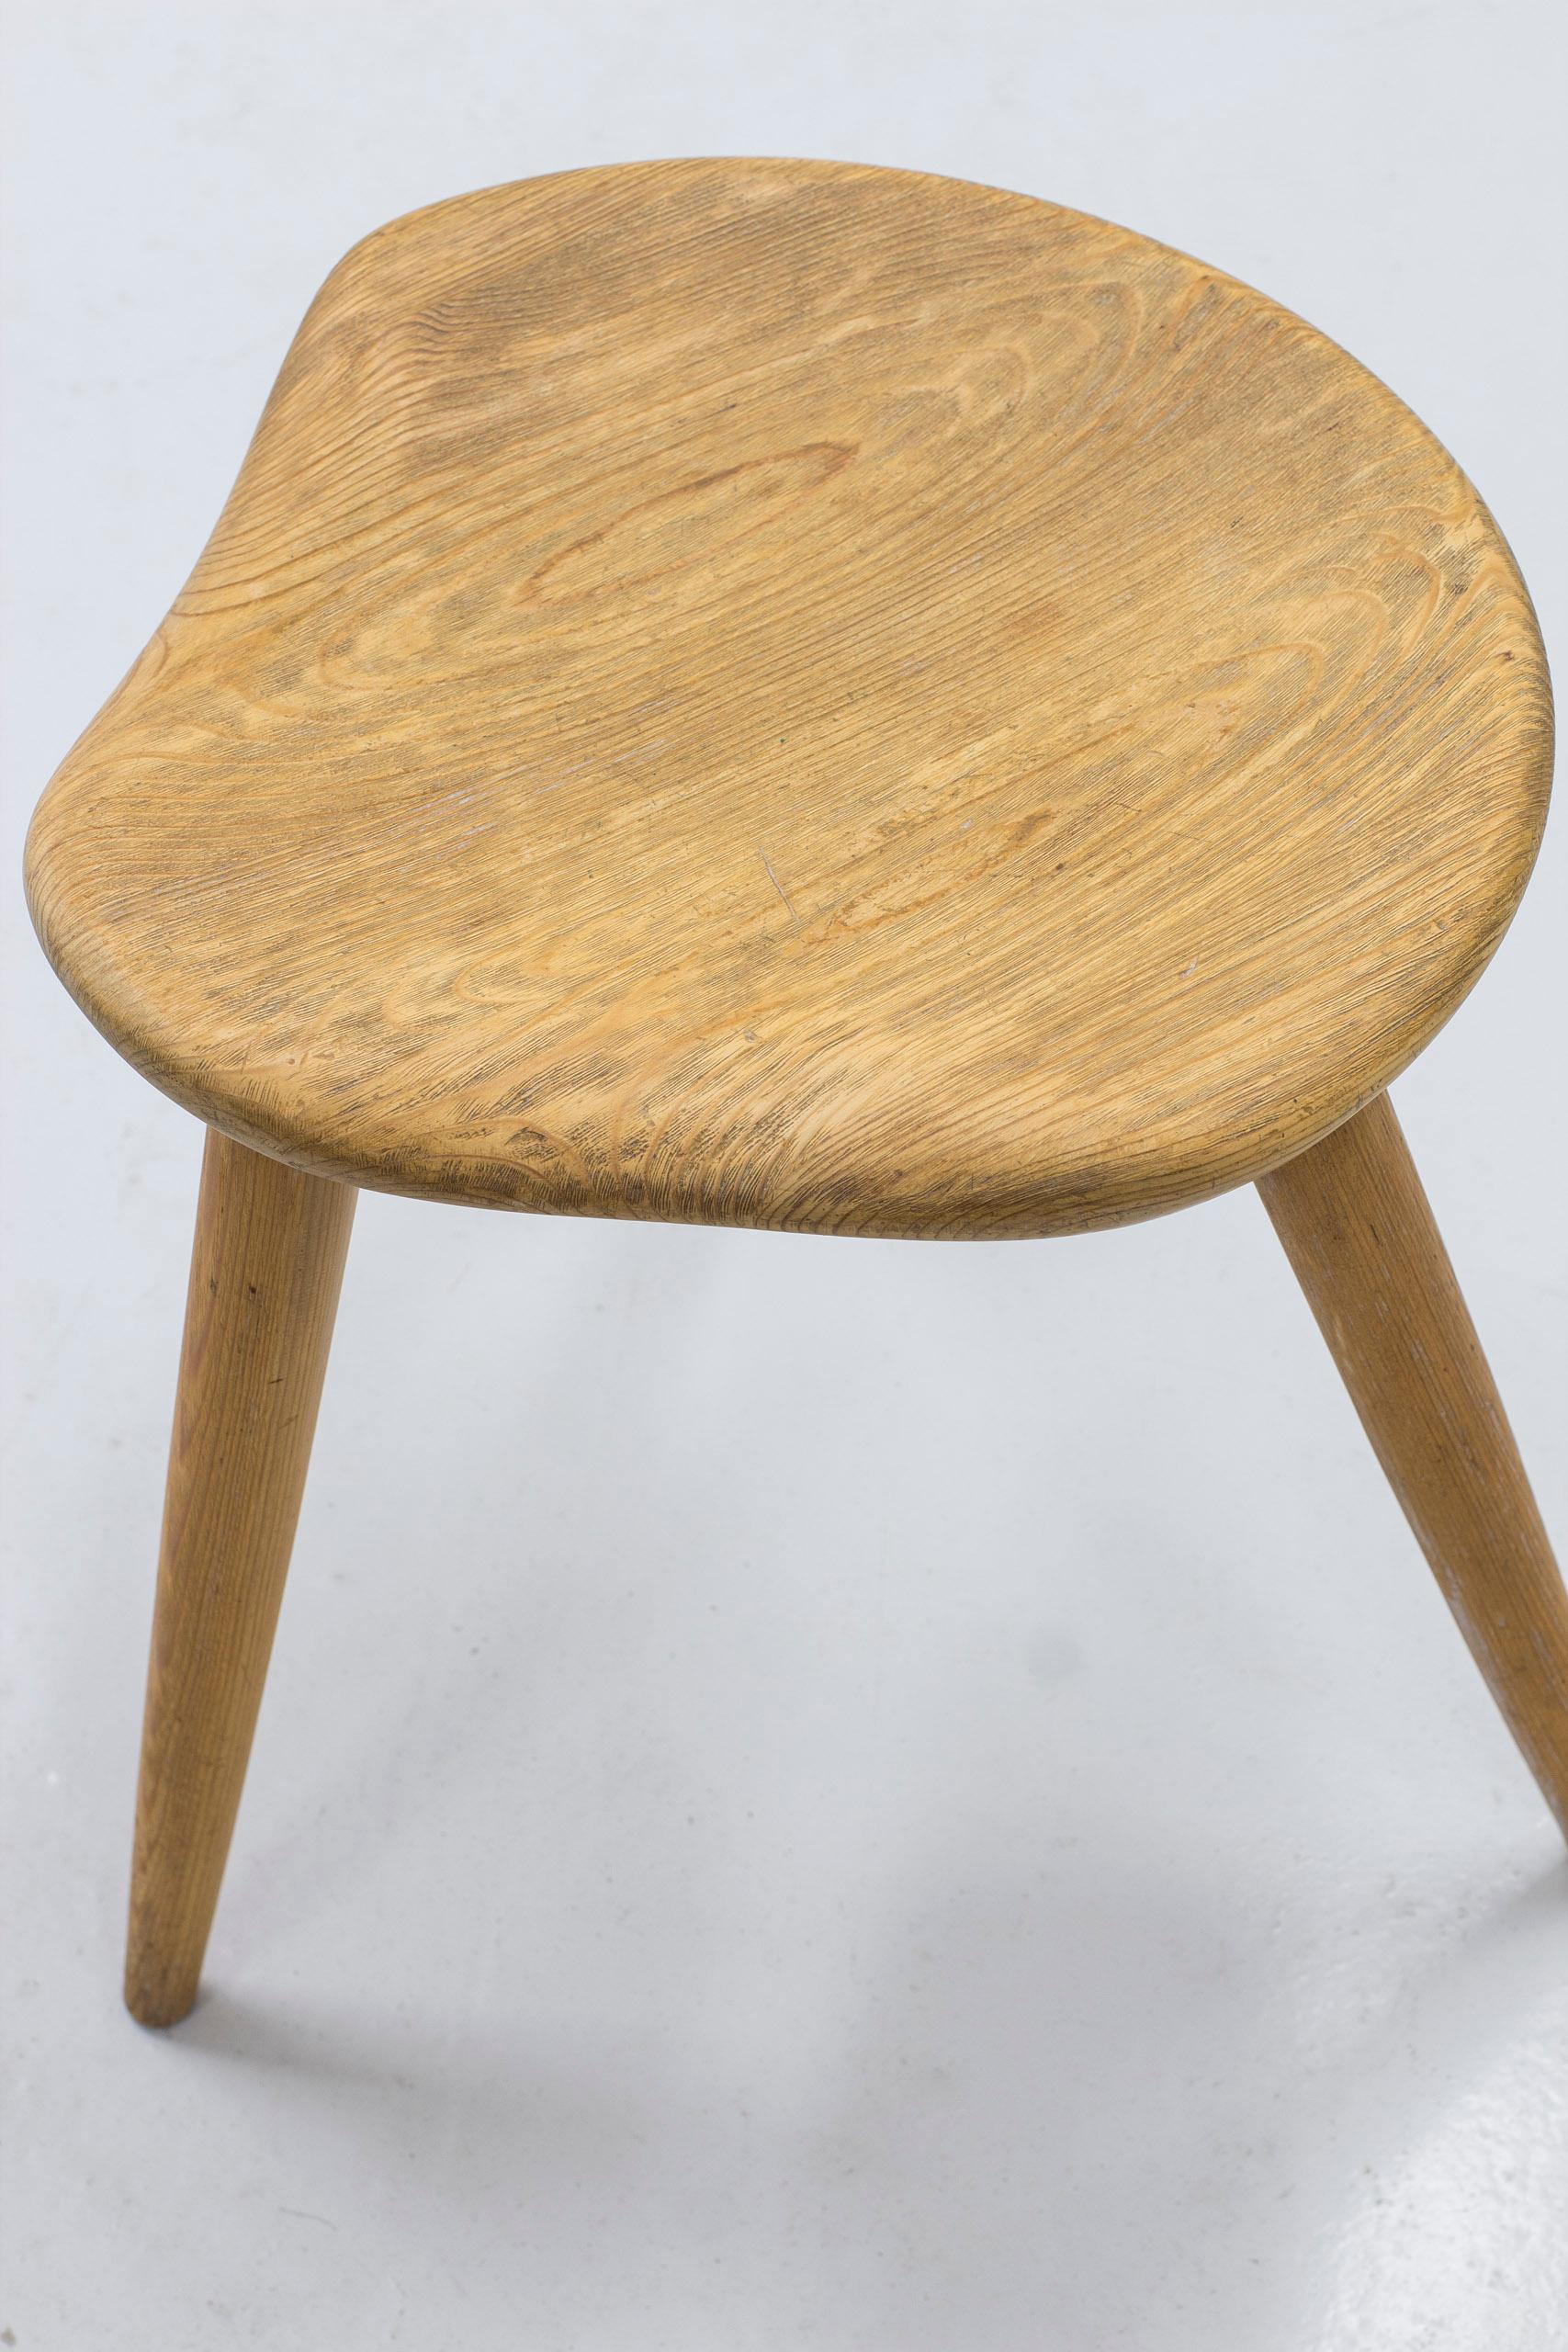 Norwegian Sportstuge Stool in Solid Pine Made in Norway by Norsk Husflid, circa 1950s For Sale